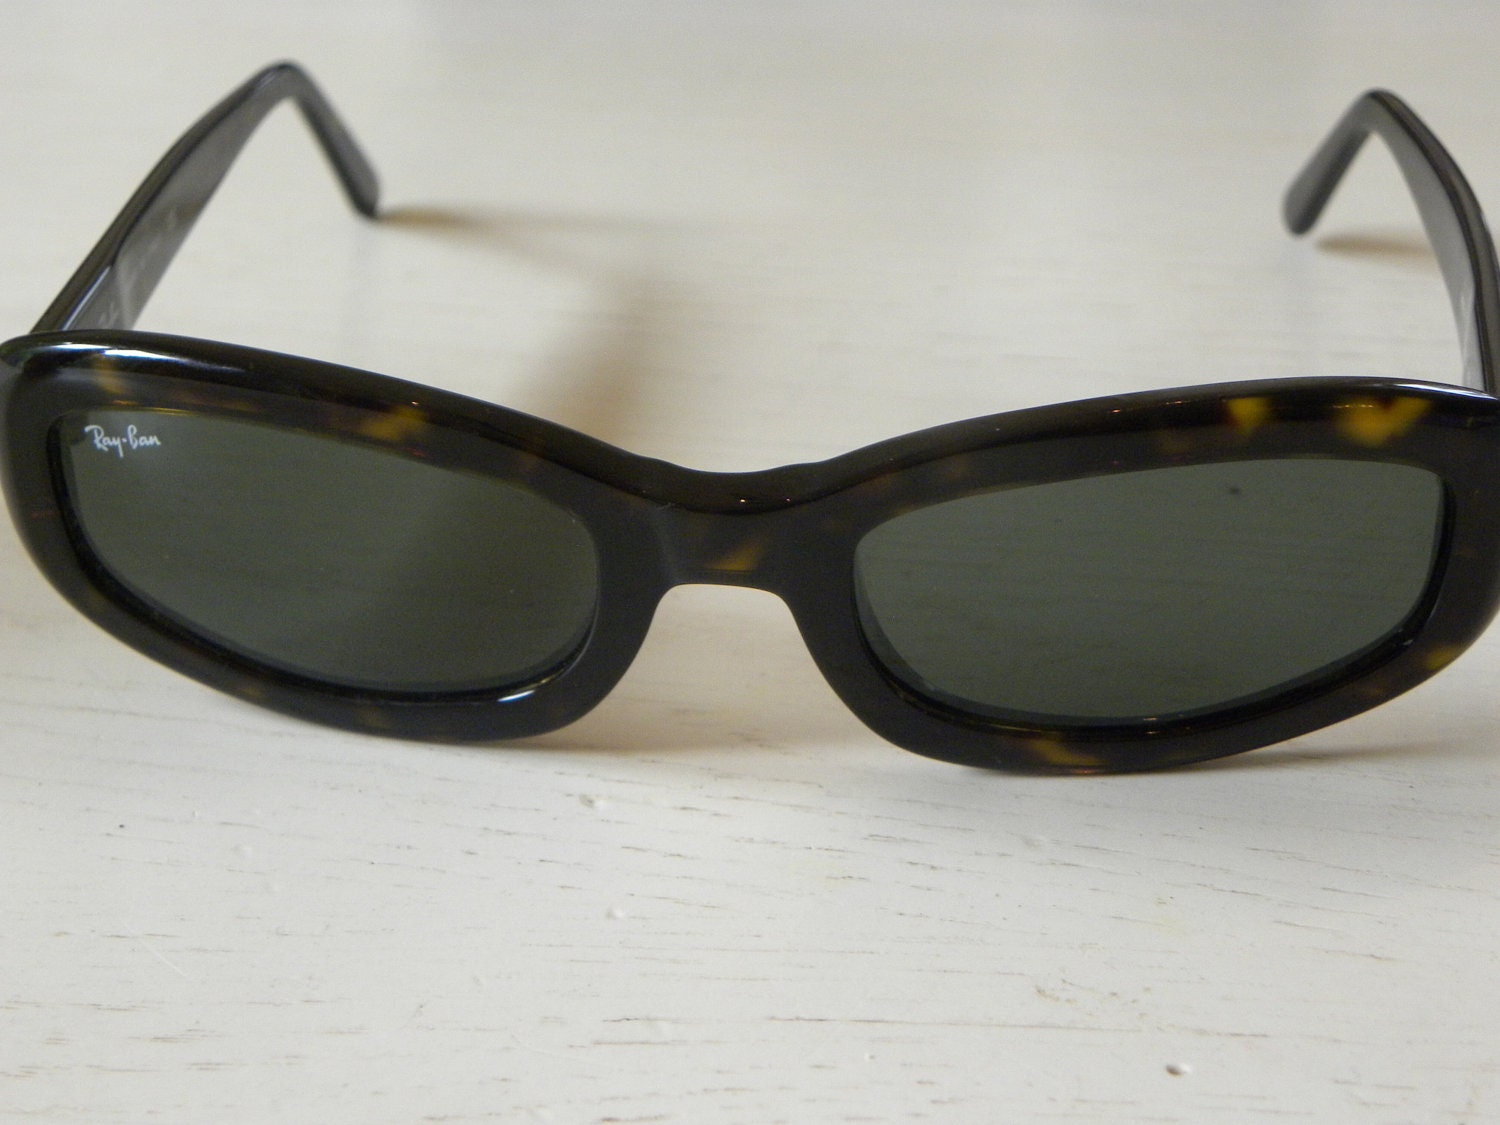 Vintage Tortoise Shell Authentic Ray Ban by JustLastWednesday